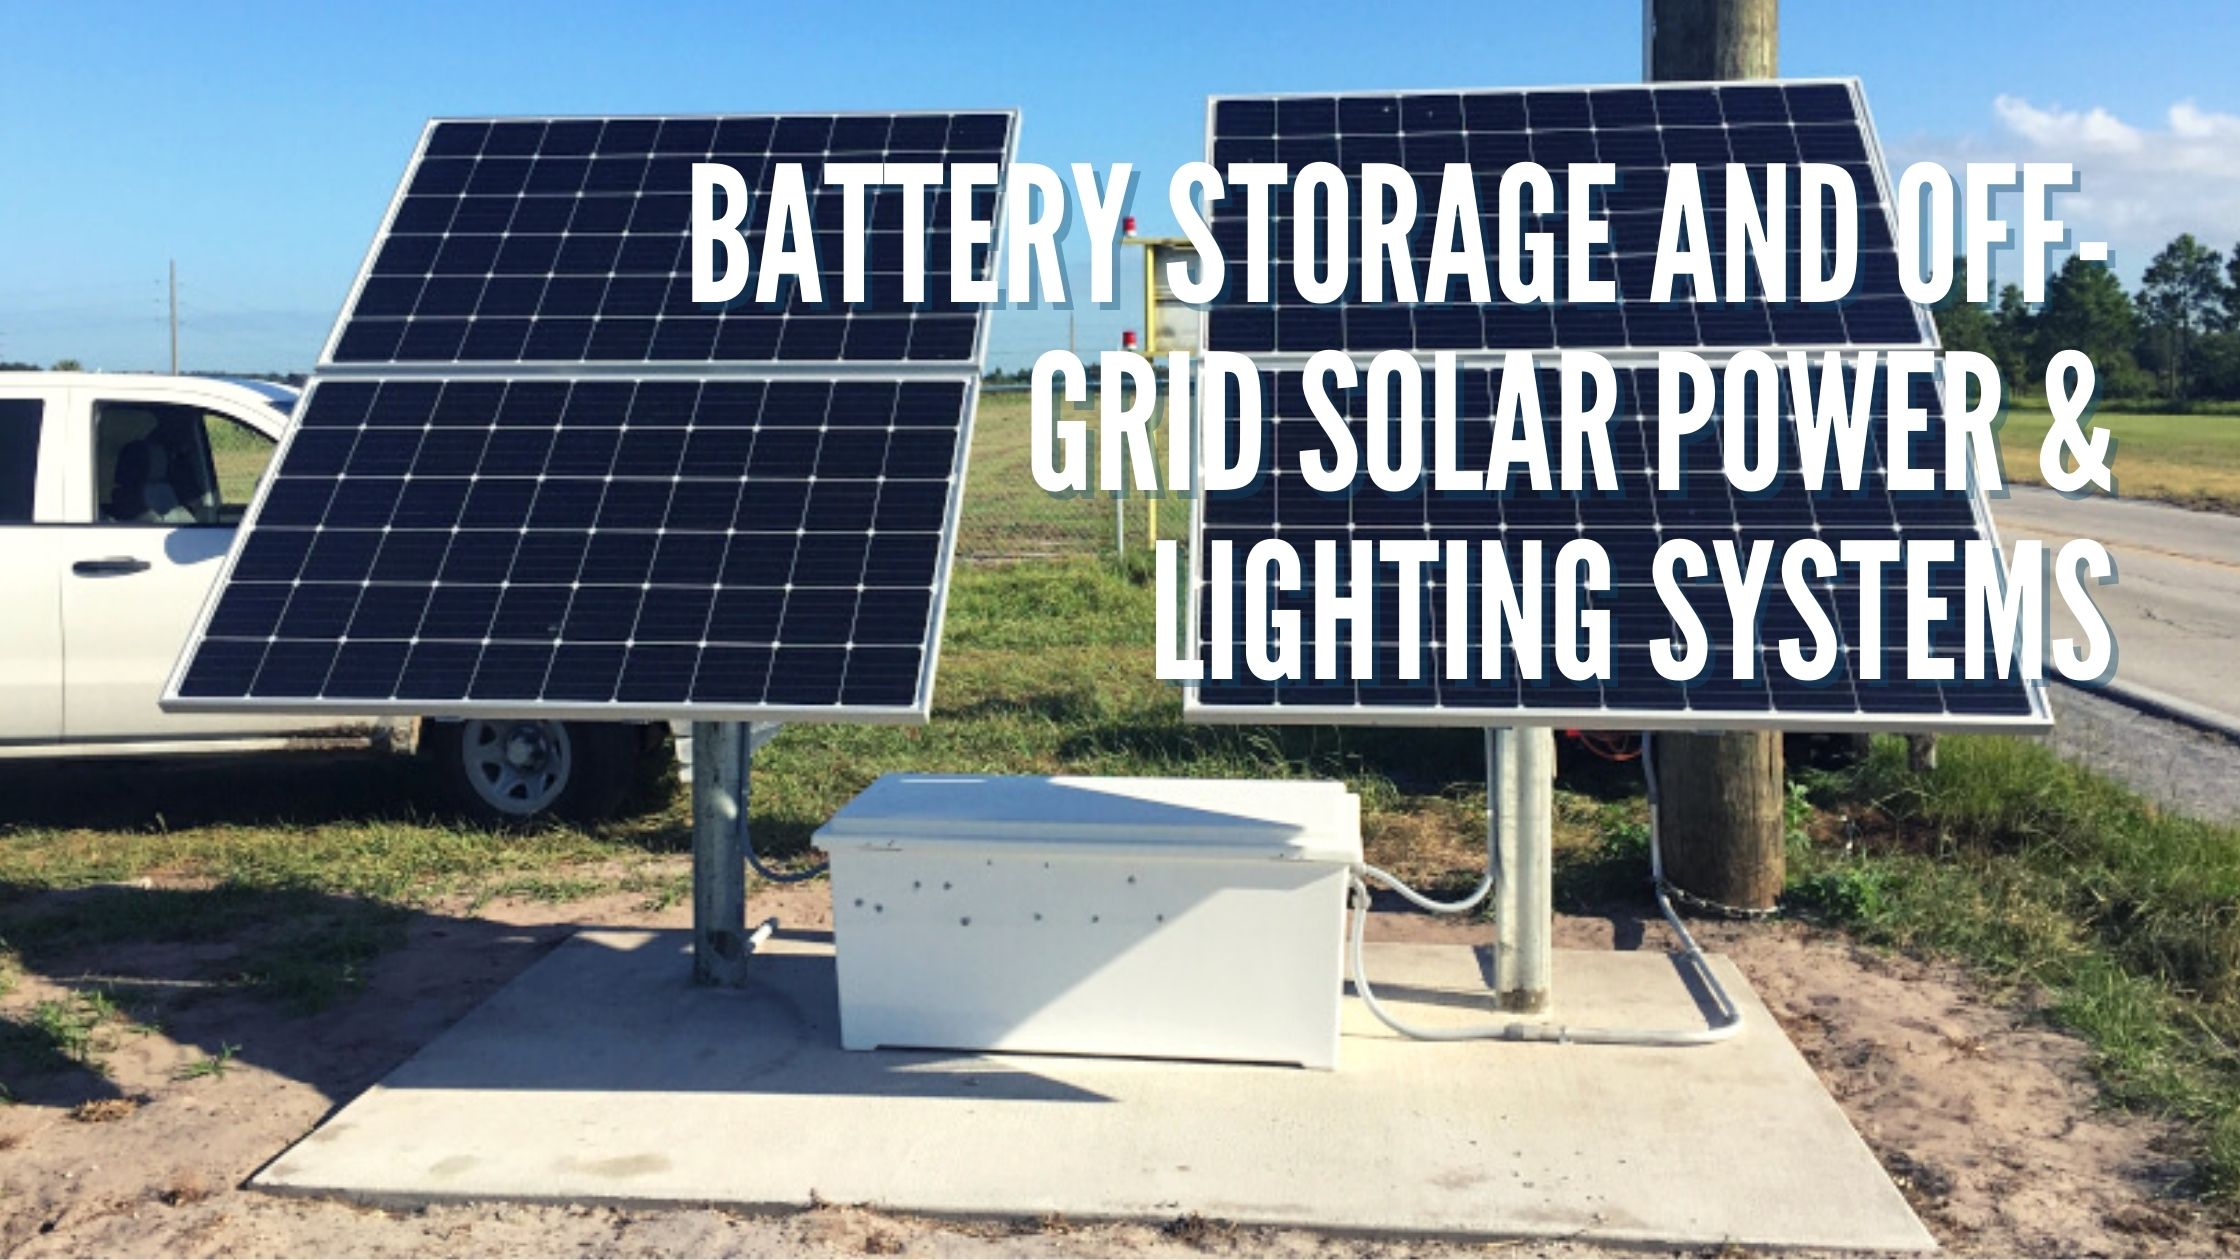 Battery Storage and Off-Grid Solar Power & Lighting Systems